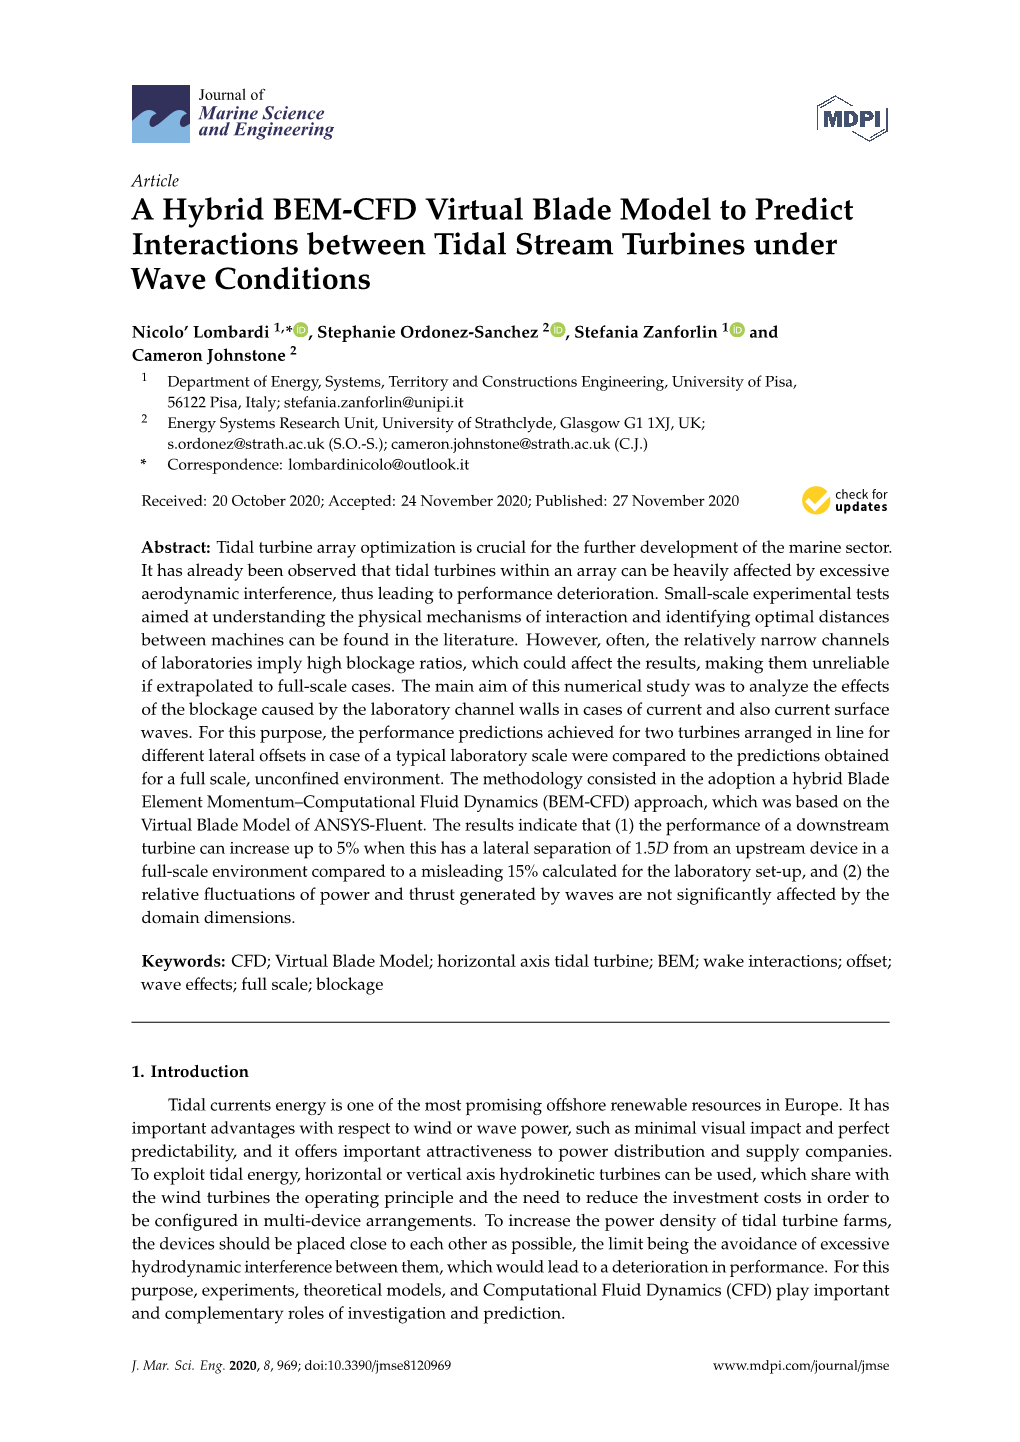 A Hybrid BEM-CFD Virtual Blade Model to Predict Interactions Between Tidal Stream Turbines Under Wave Conditions